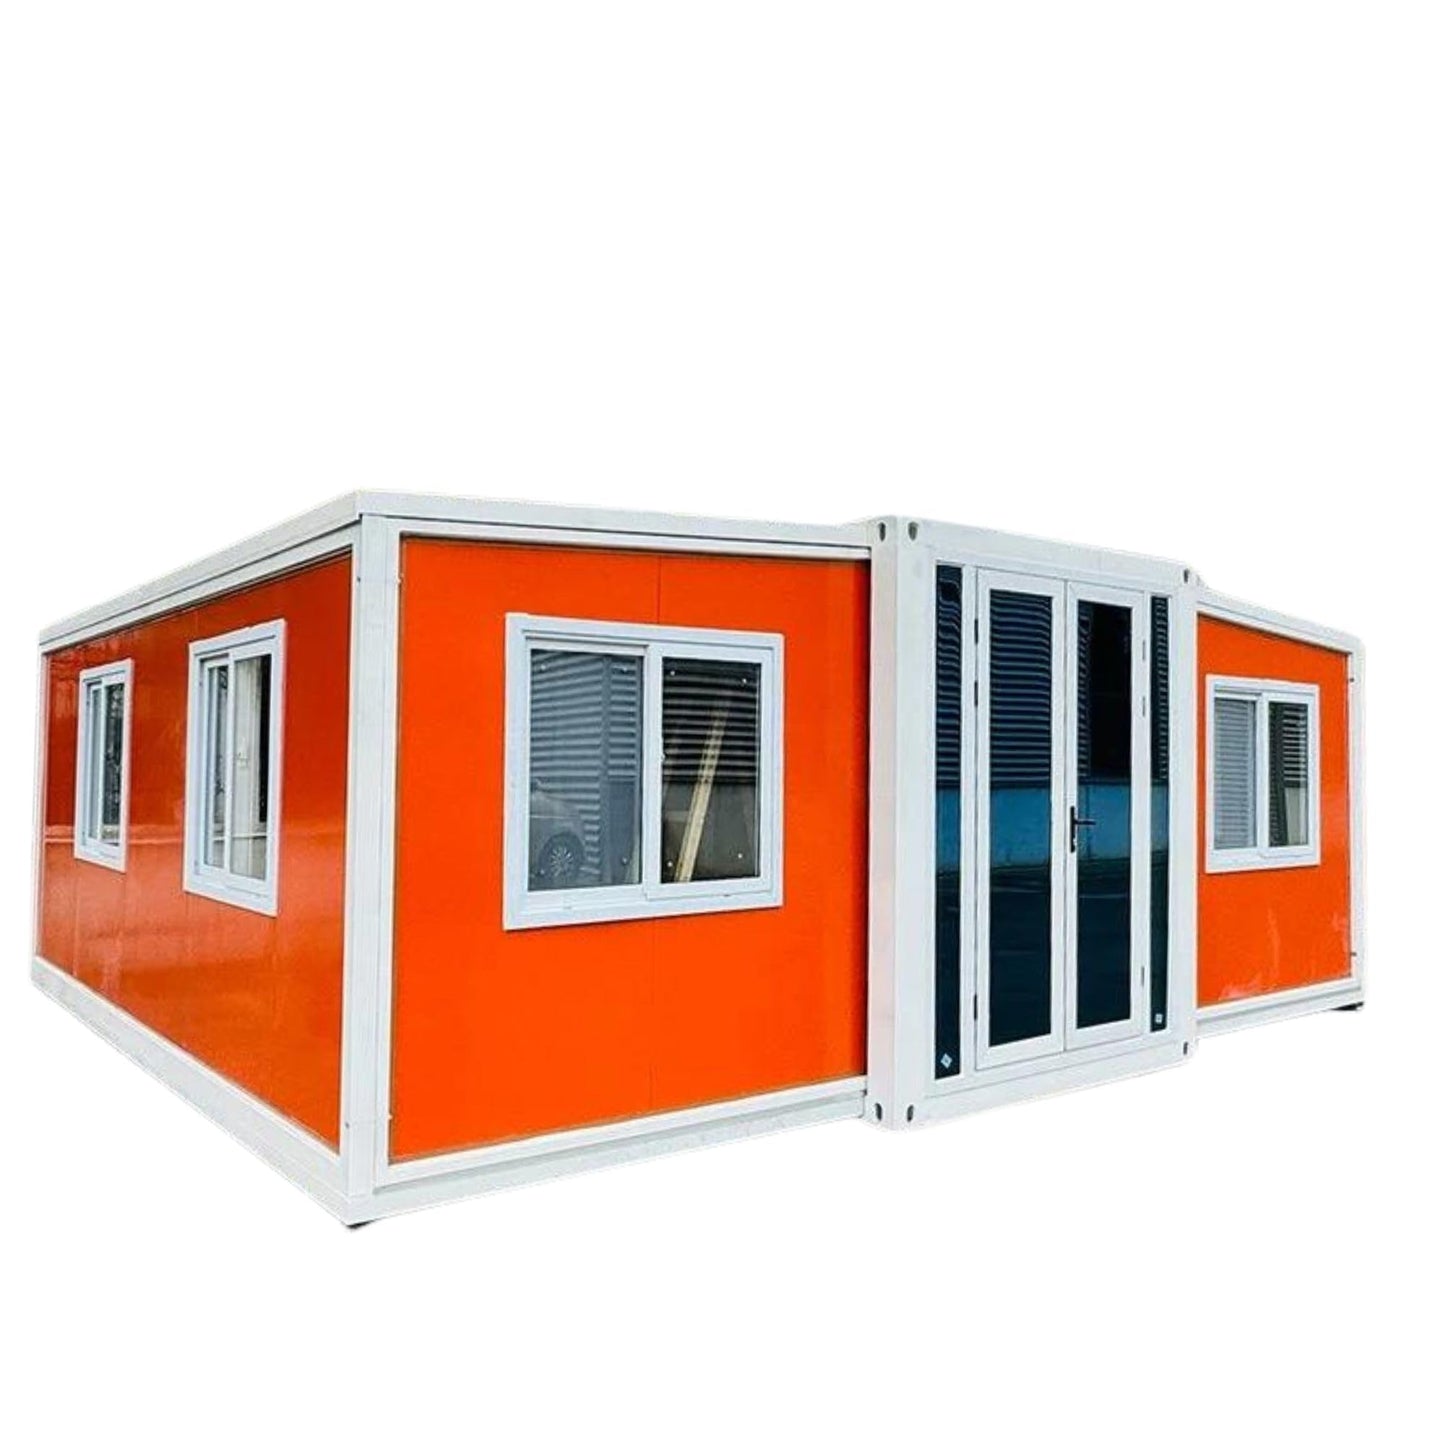 Portable Prefabricated House to Live in Tiny Home Mobile Expandable Prefab Foldable House for Hotel, Rent, S Guard, Hunting & Various Uses (20ft Mini) (Orange)